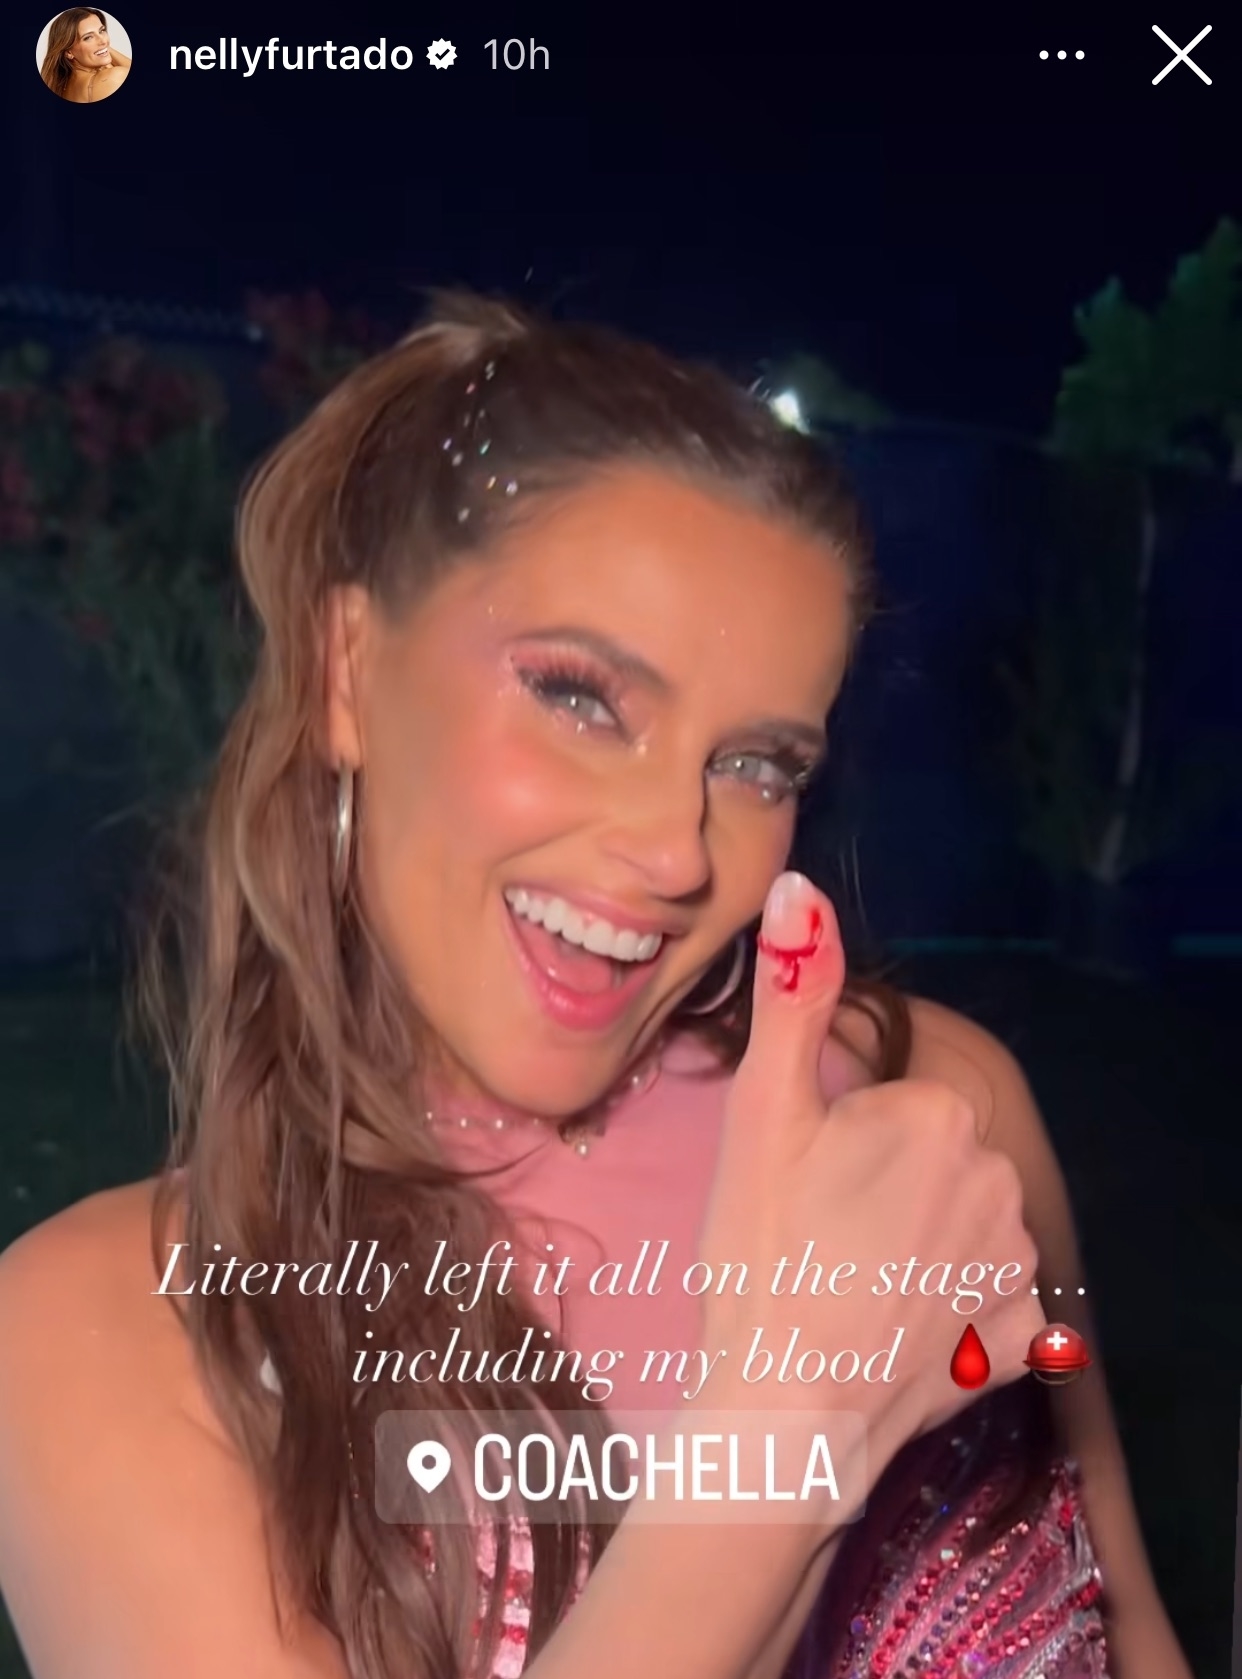 Nelly Furtado smiling with a thumbs-up, showing a small blood spot on her finger, text about a performance injury at Coachella